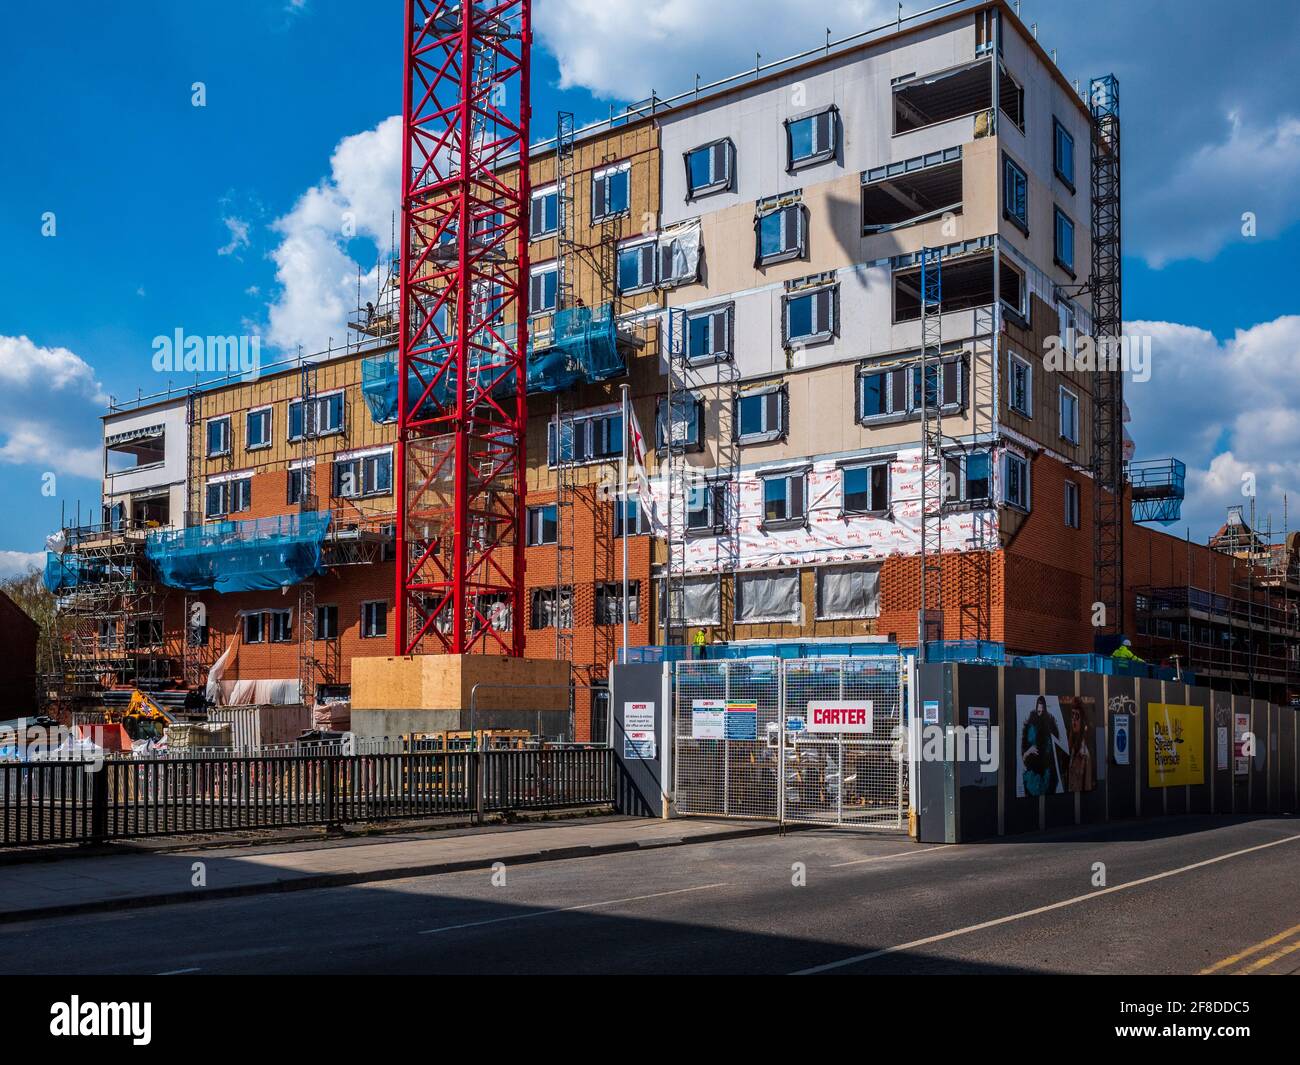 Student Accommodation being constructed in Norwich for the Norwich University of the Arts. Student Flats under construction. Stock Photo